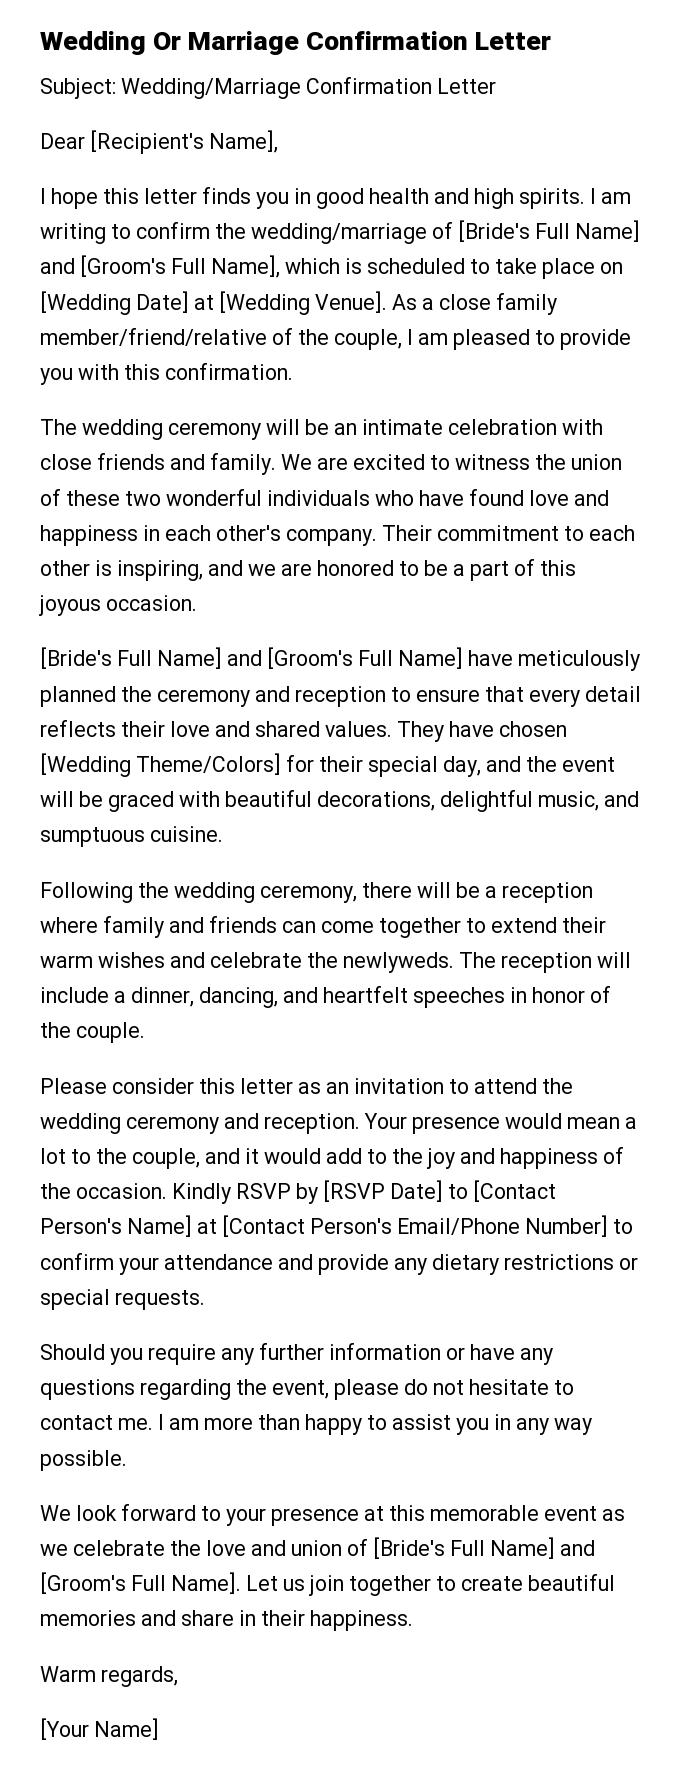 Wedding Or Marriage Confirmation Letter